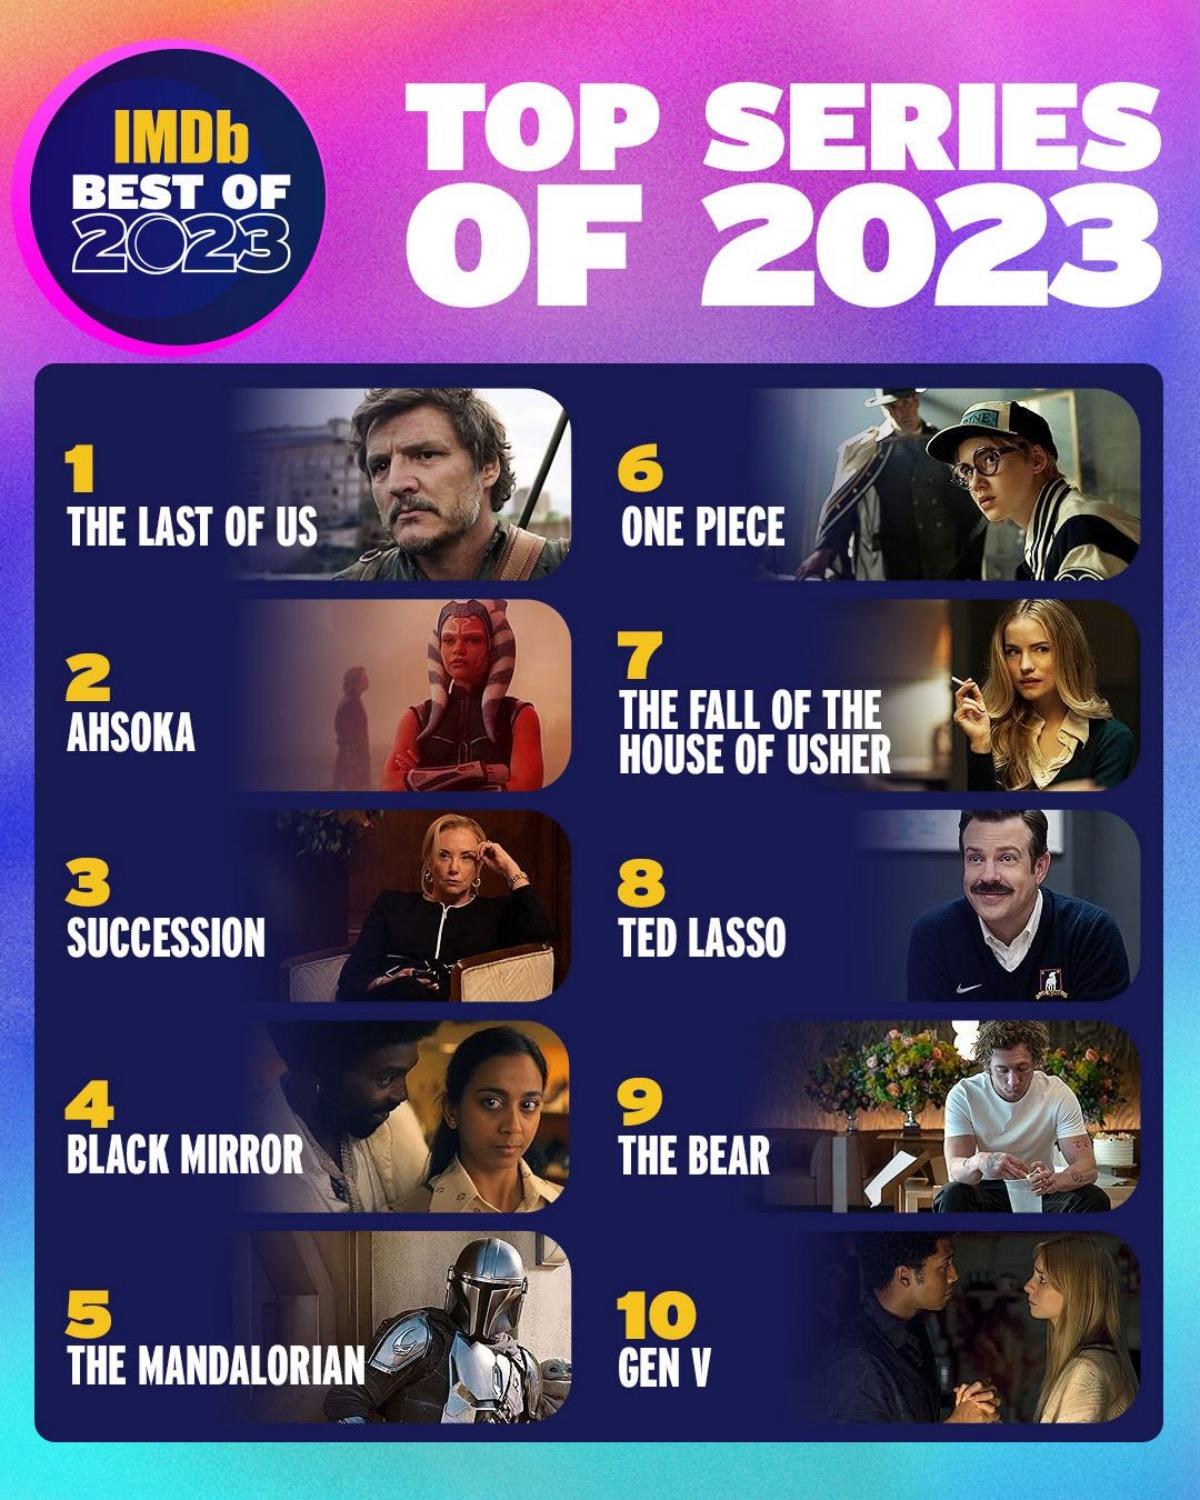 12 most popular TV series of 2023 to watch again, according to IMDb